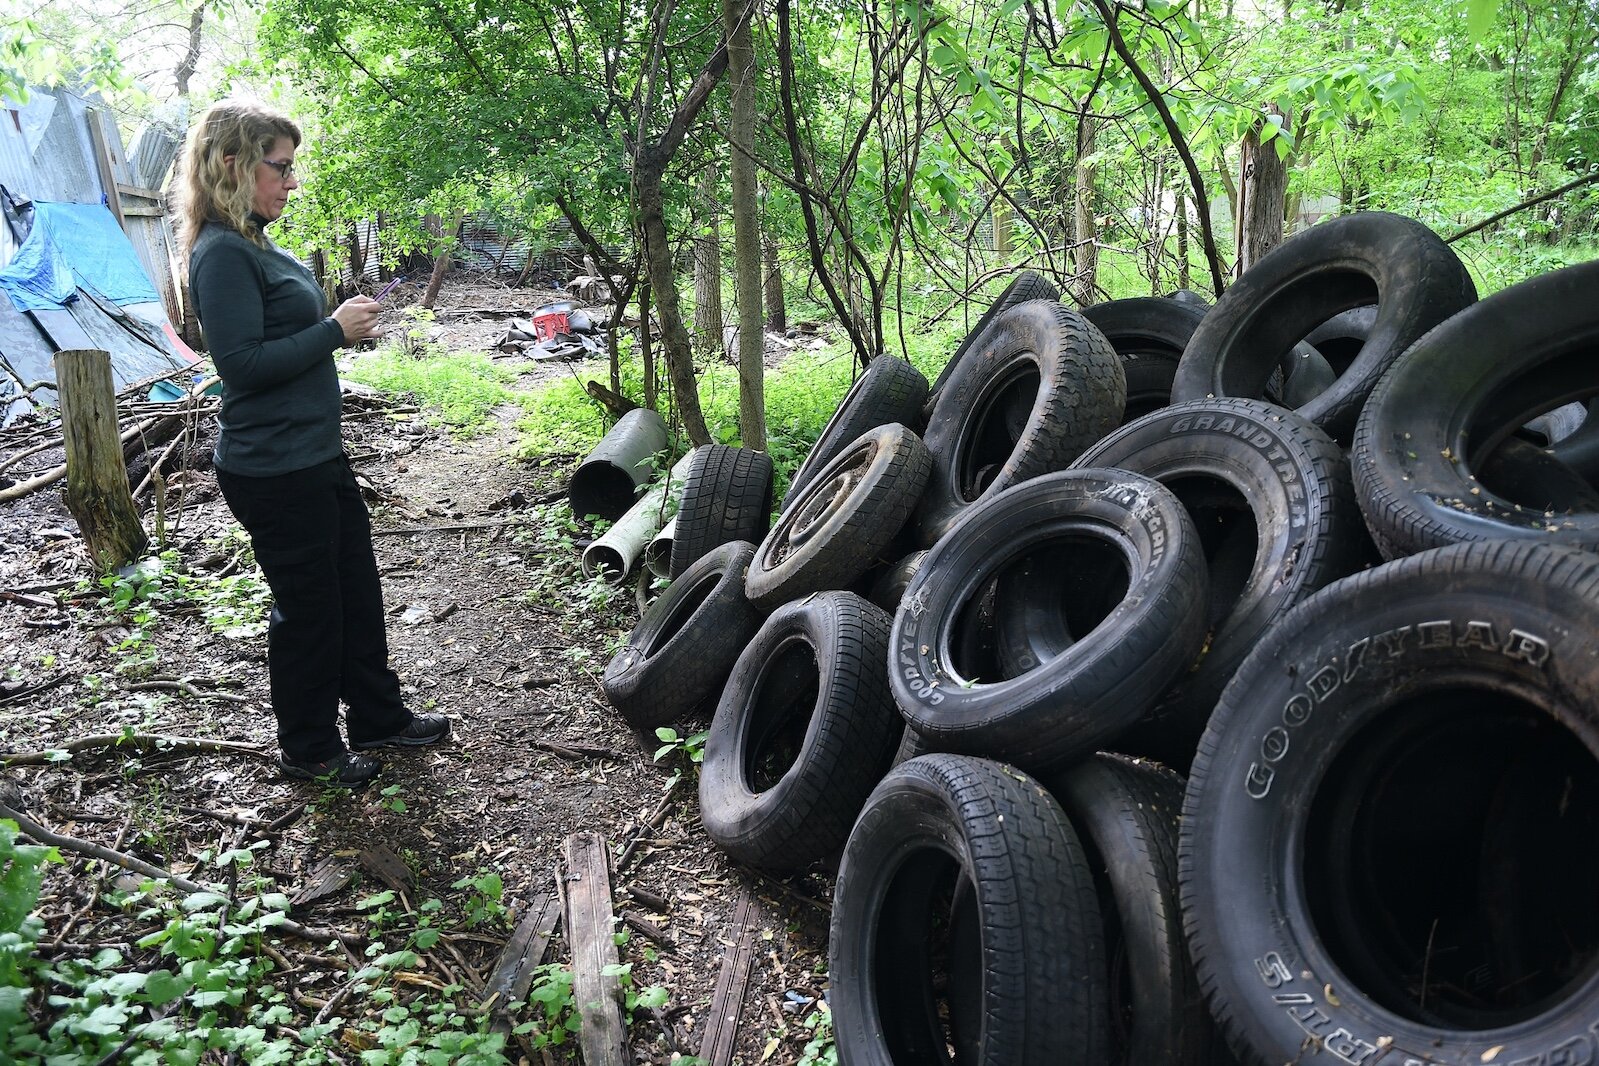 Sarah Kelly, Solid Waste and Recycling Coordinator for Calhoun County, views abandoned old tires on property located on West Hamblin Avenue, just west of Butler Street, in Battle Creek.